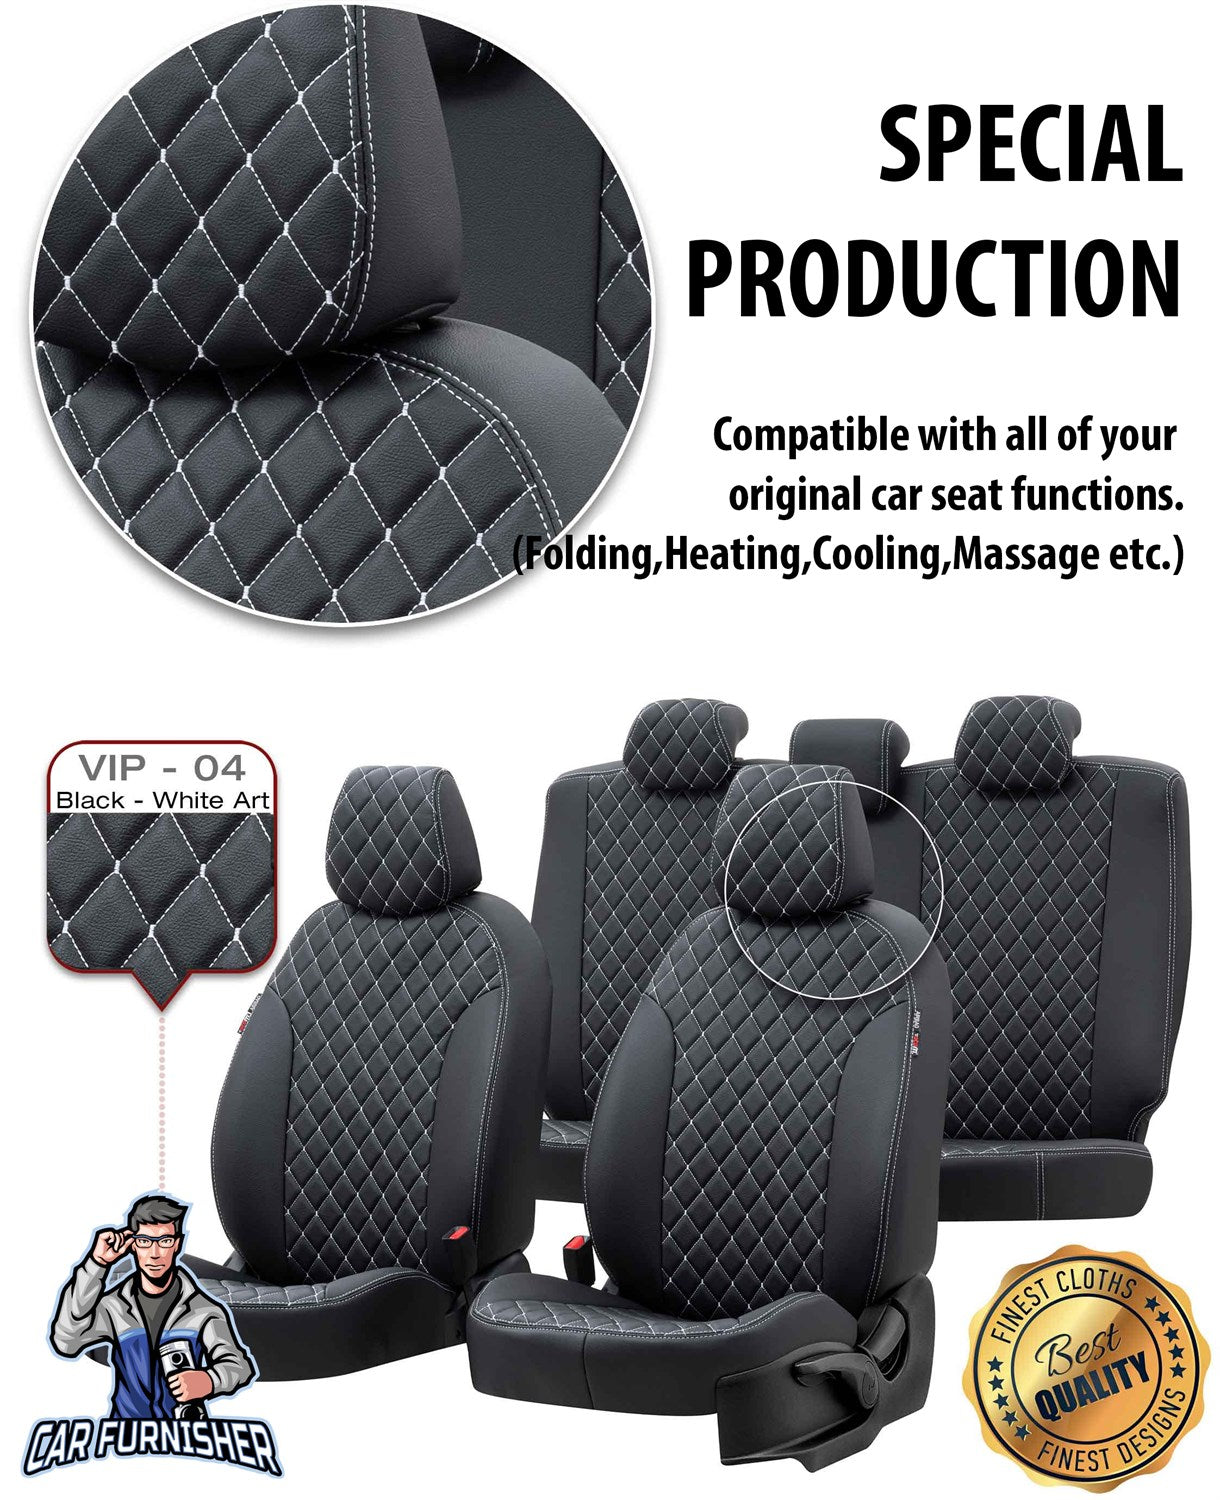 Citroen Jumpy Seat Covers Madrid Leather Design Beige Leather